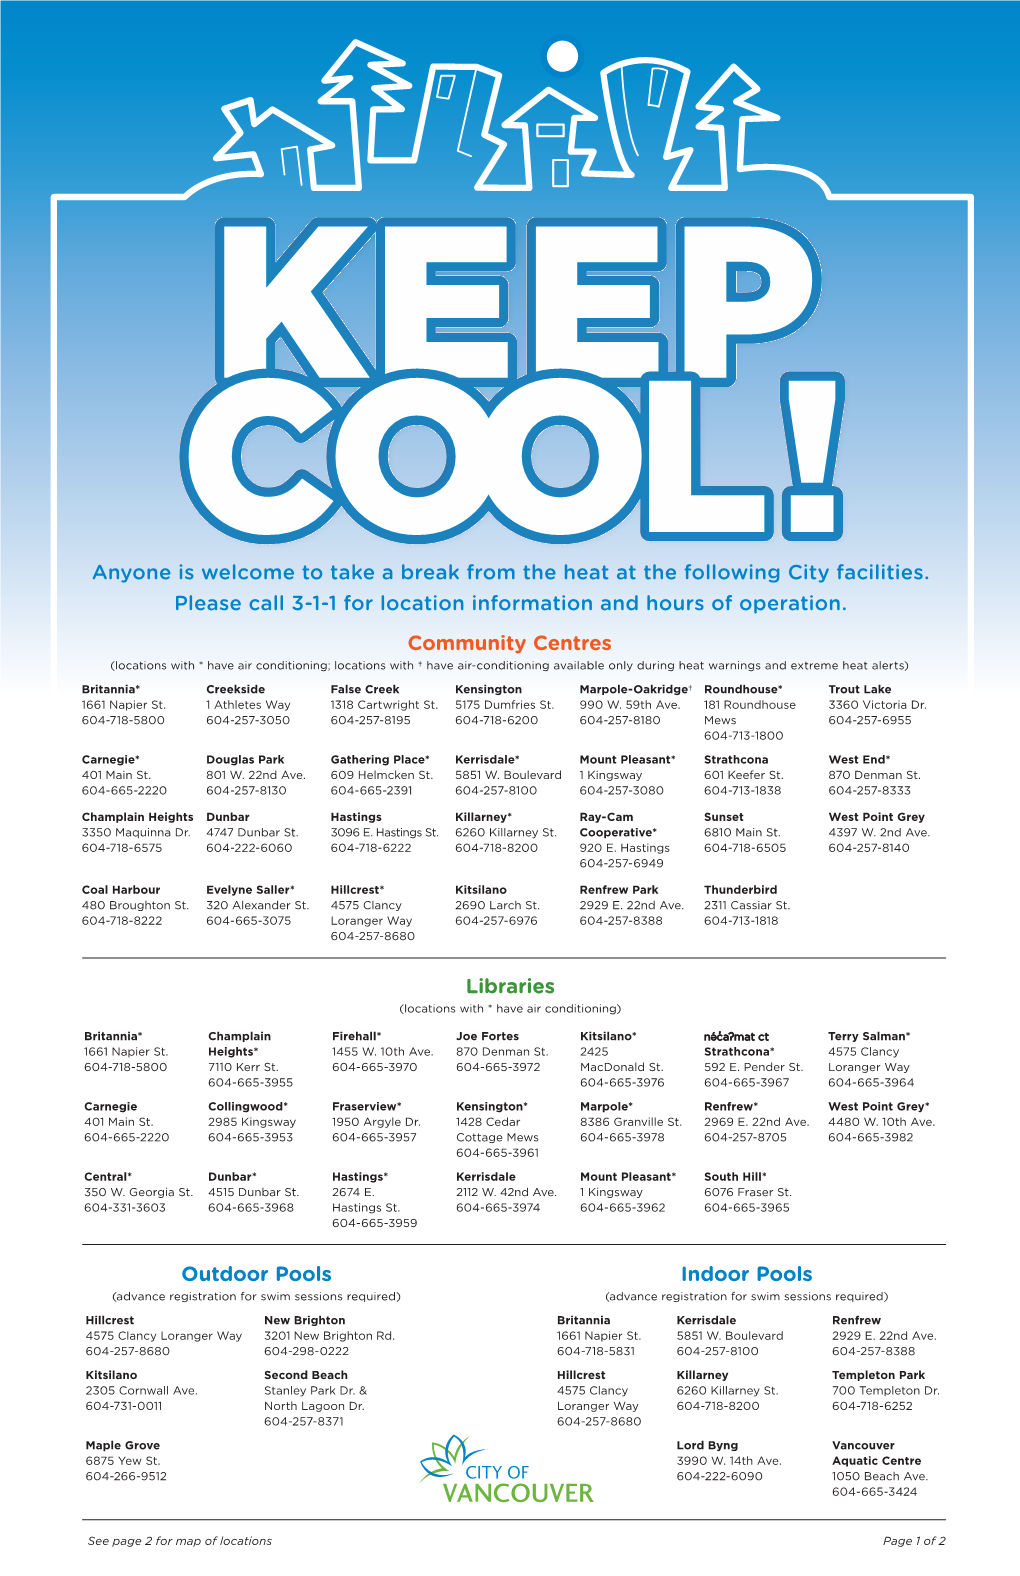 KEEP COOL ! Anyone Is Welcome to Take a Break from the Heat at the Following City Facilities